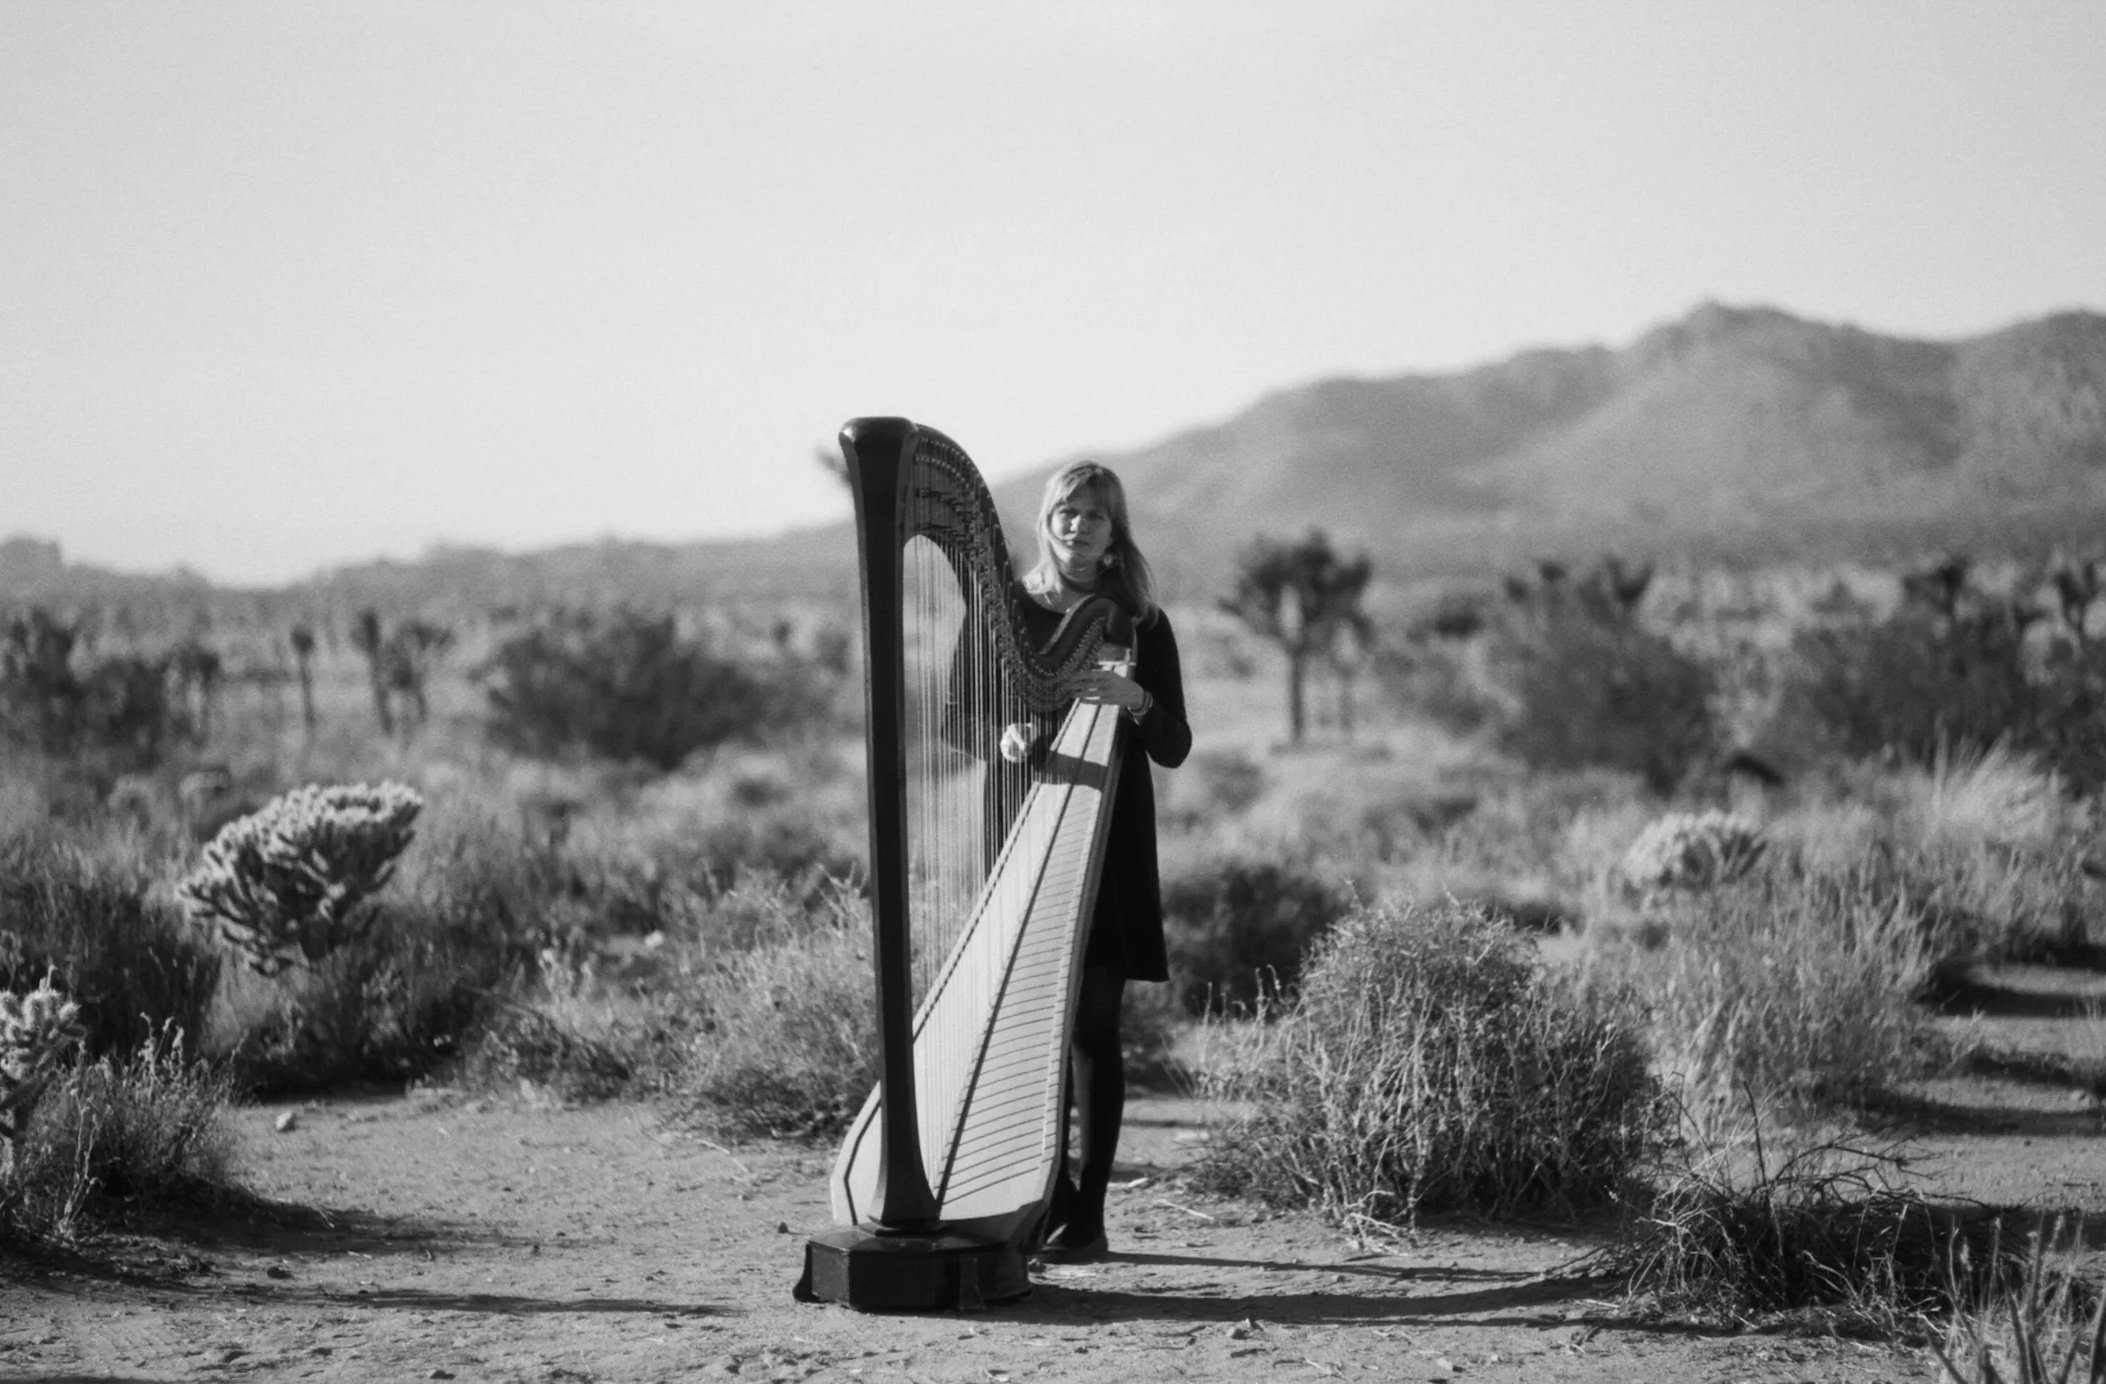    The New Yorker: The Seismic Emotion of Mary Lattimore's Harp Music   